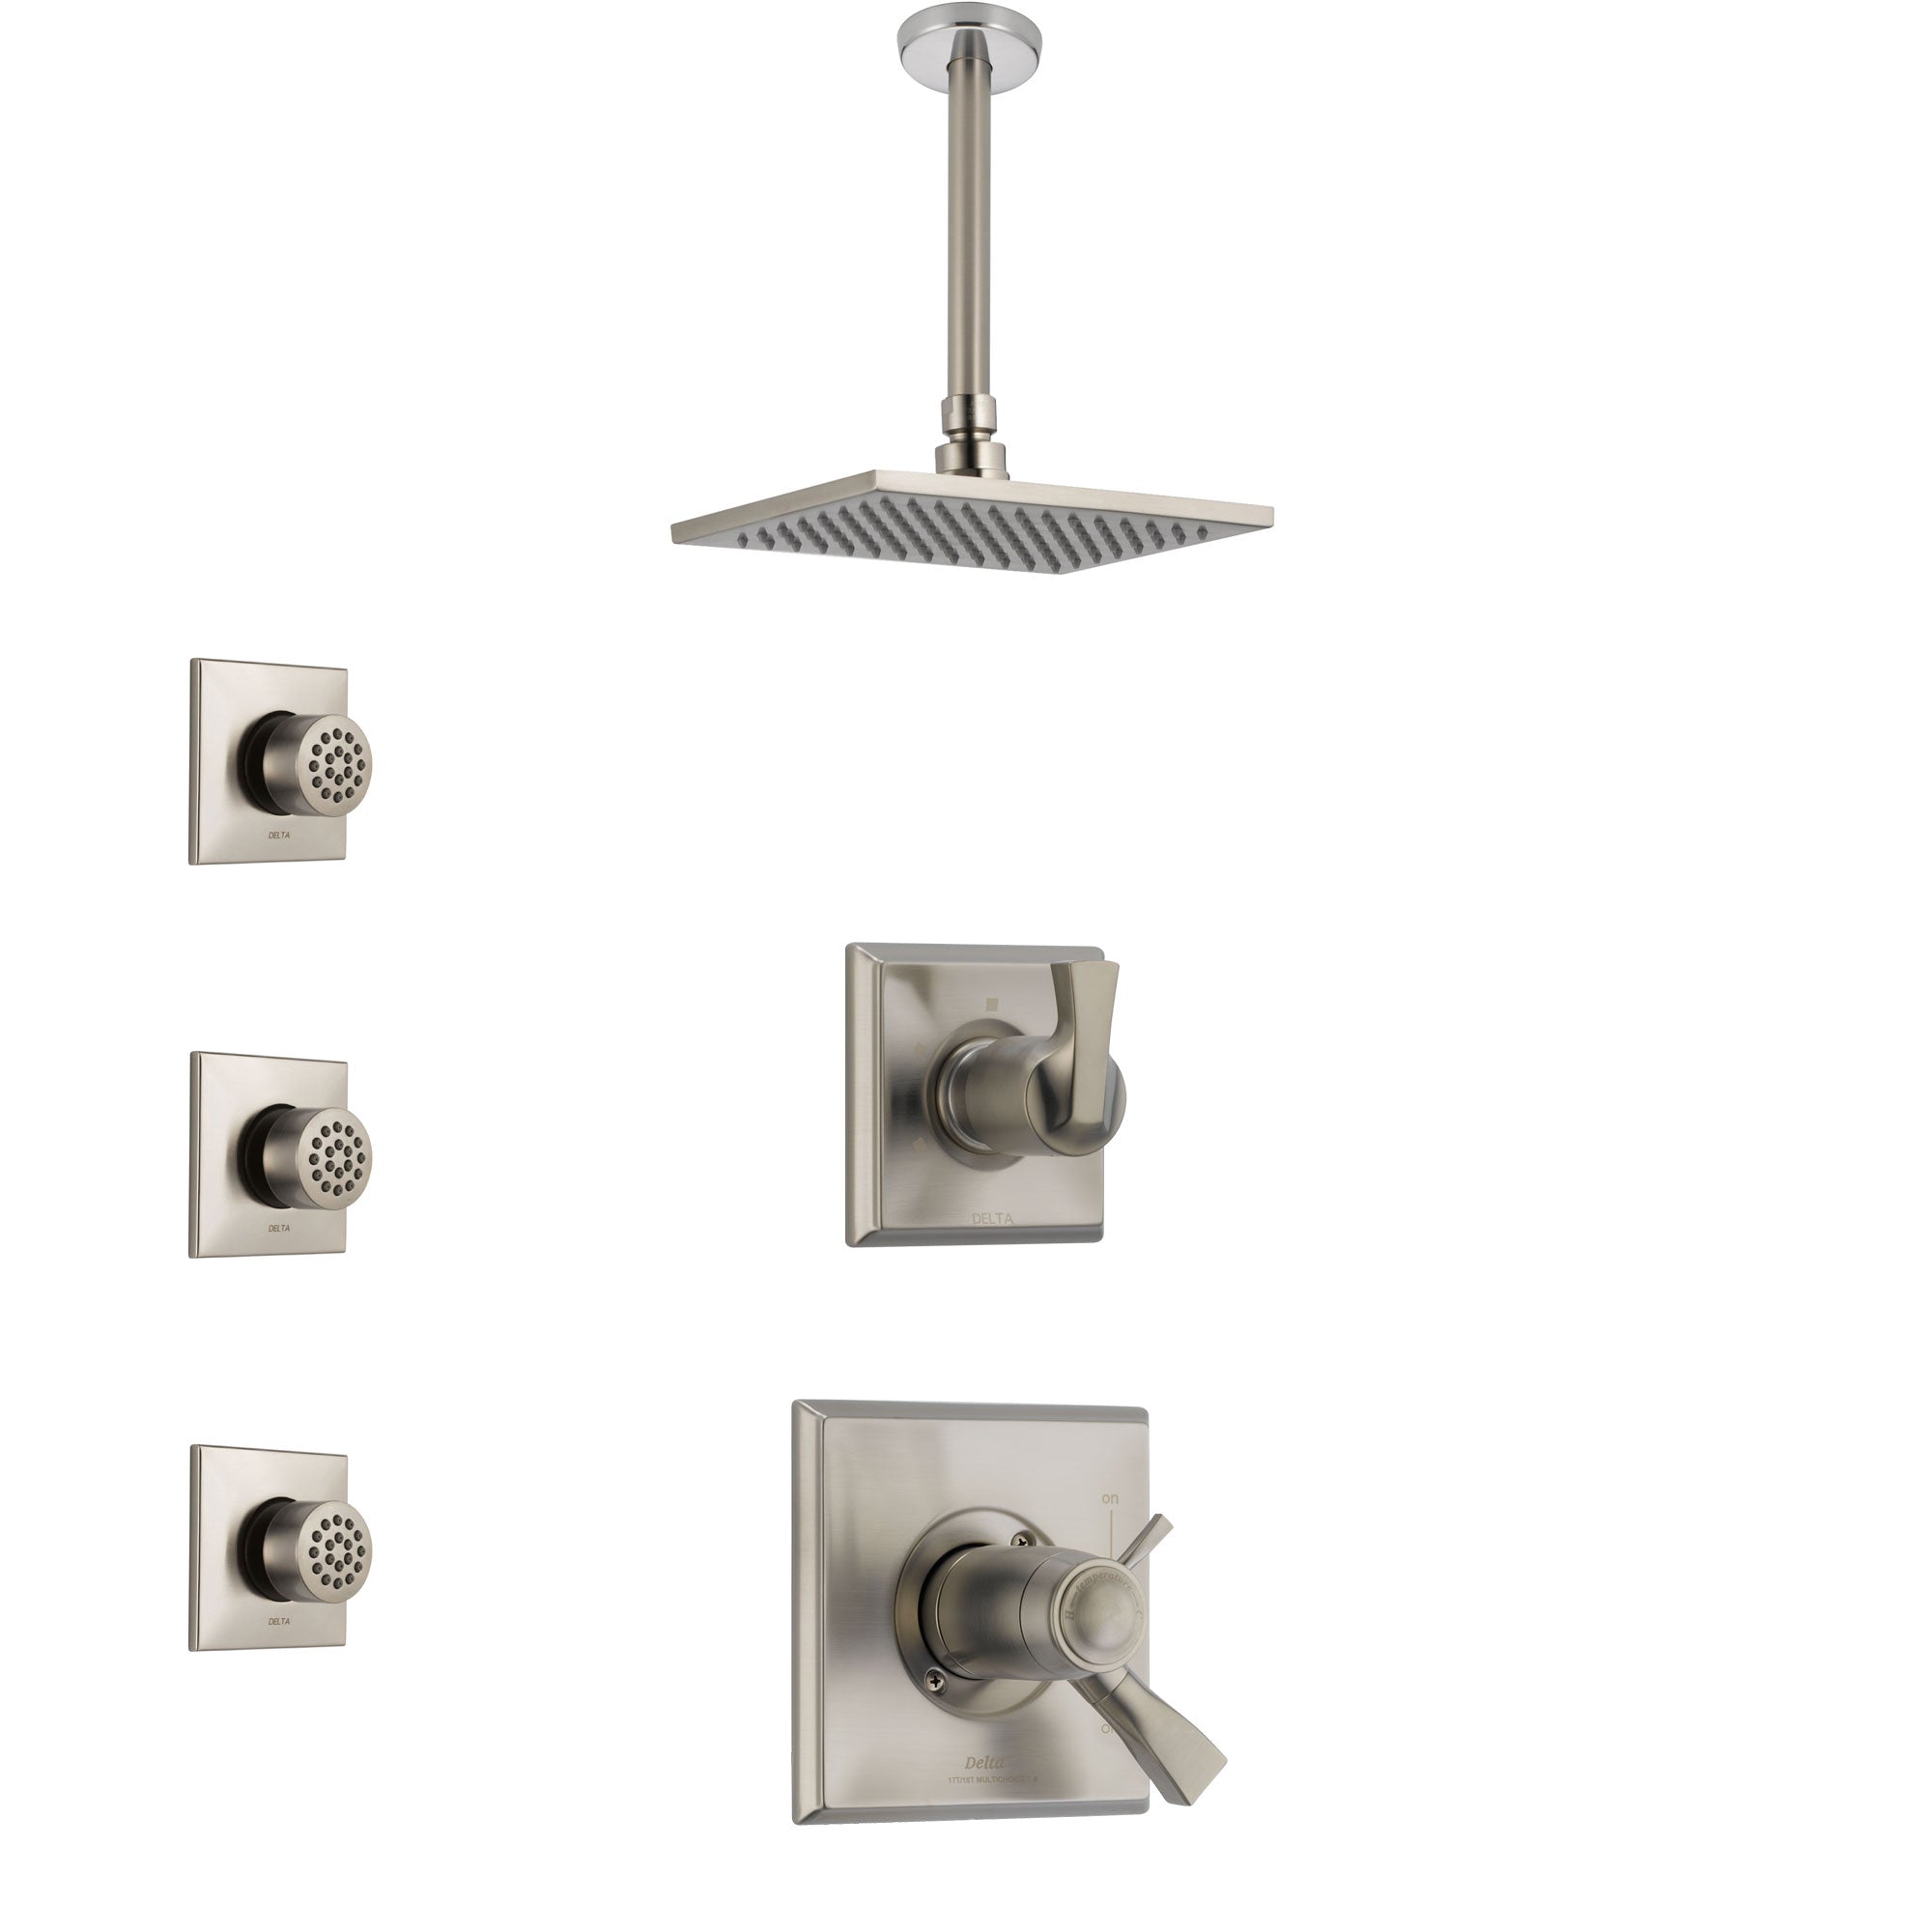 Delta Dryden Dual Thermostatic Control Handle Stainless Steel Finish Shower System, Diverter, Ceiling Mount Showerhead, and 3 Body Sprays SS17T511SS8